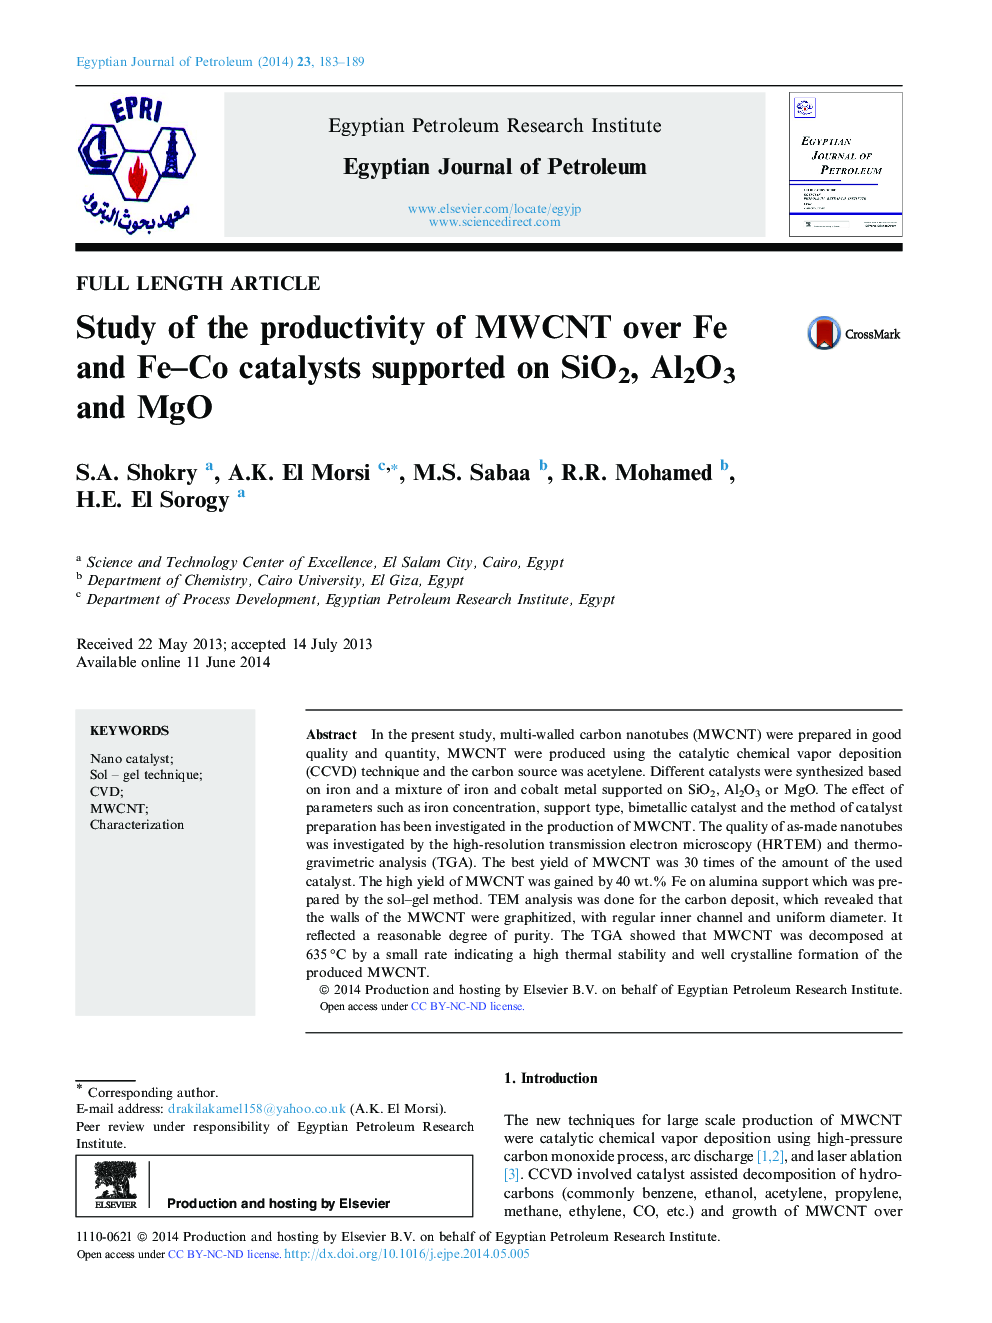 Study of the productivity of MWCNT over Fe and Fe–Co catalysts supported on SiO2, Al2O3 and MgO 